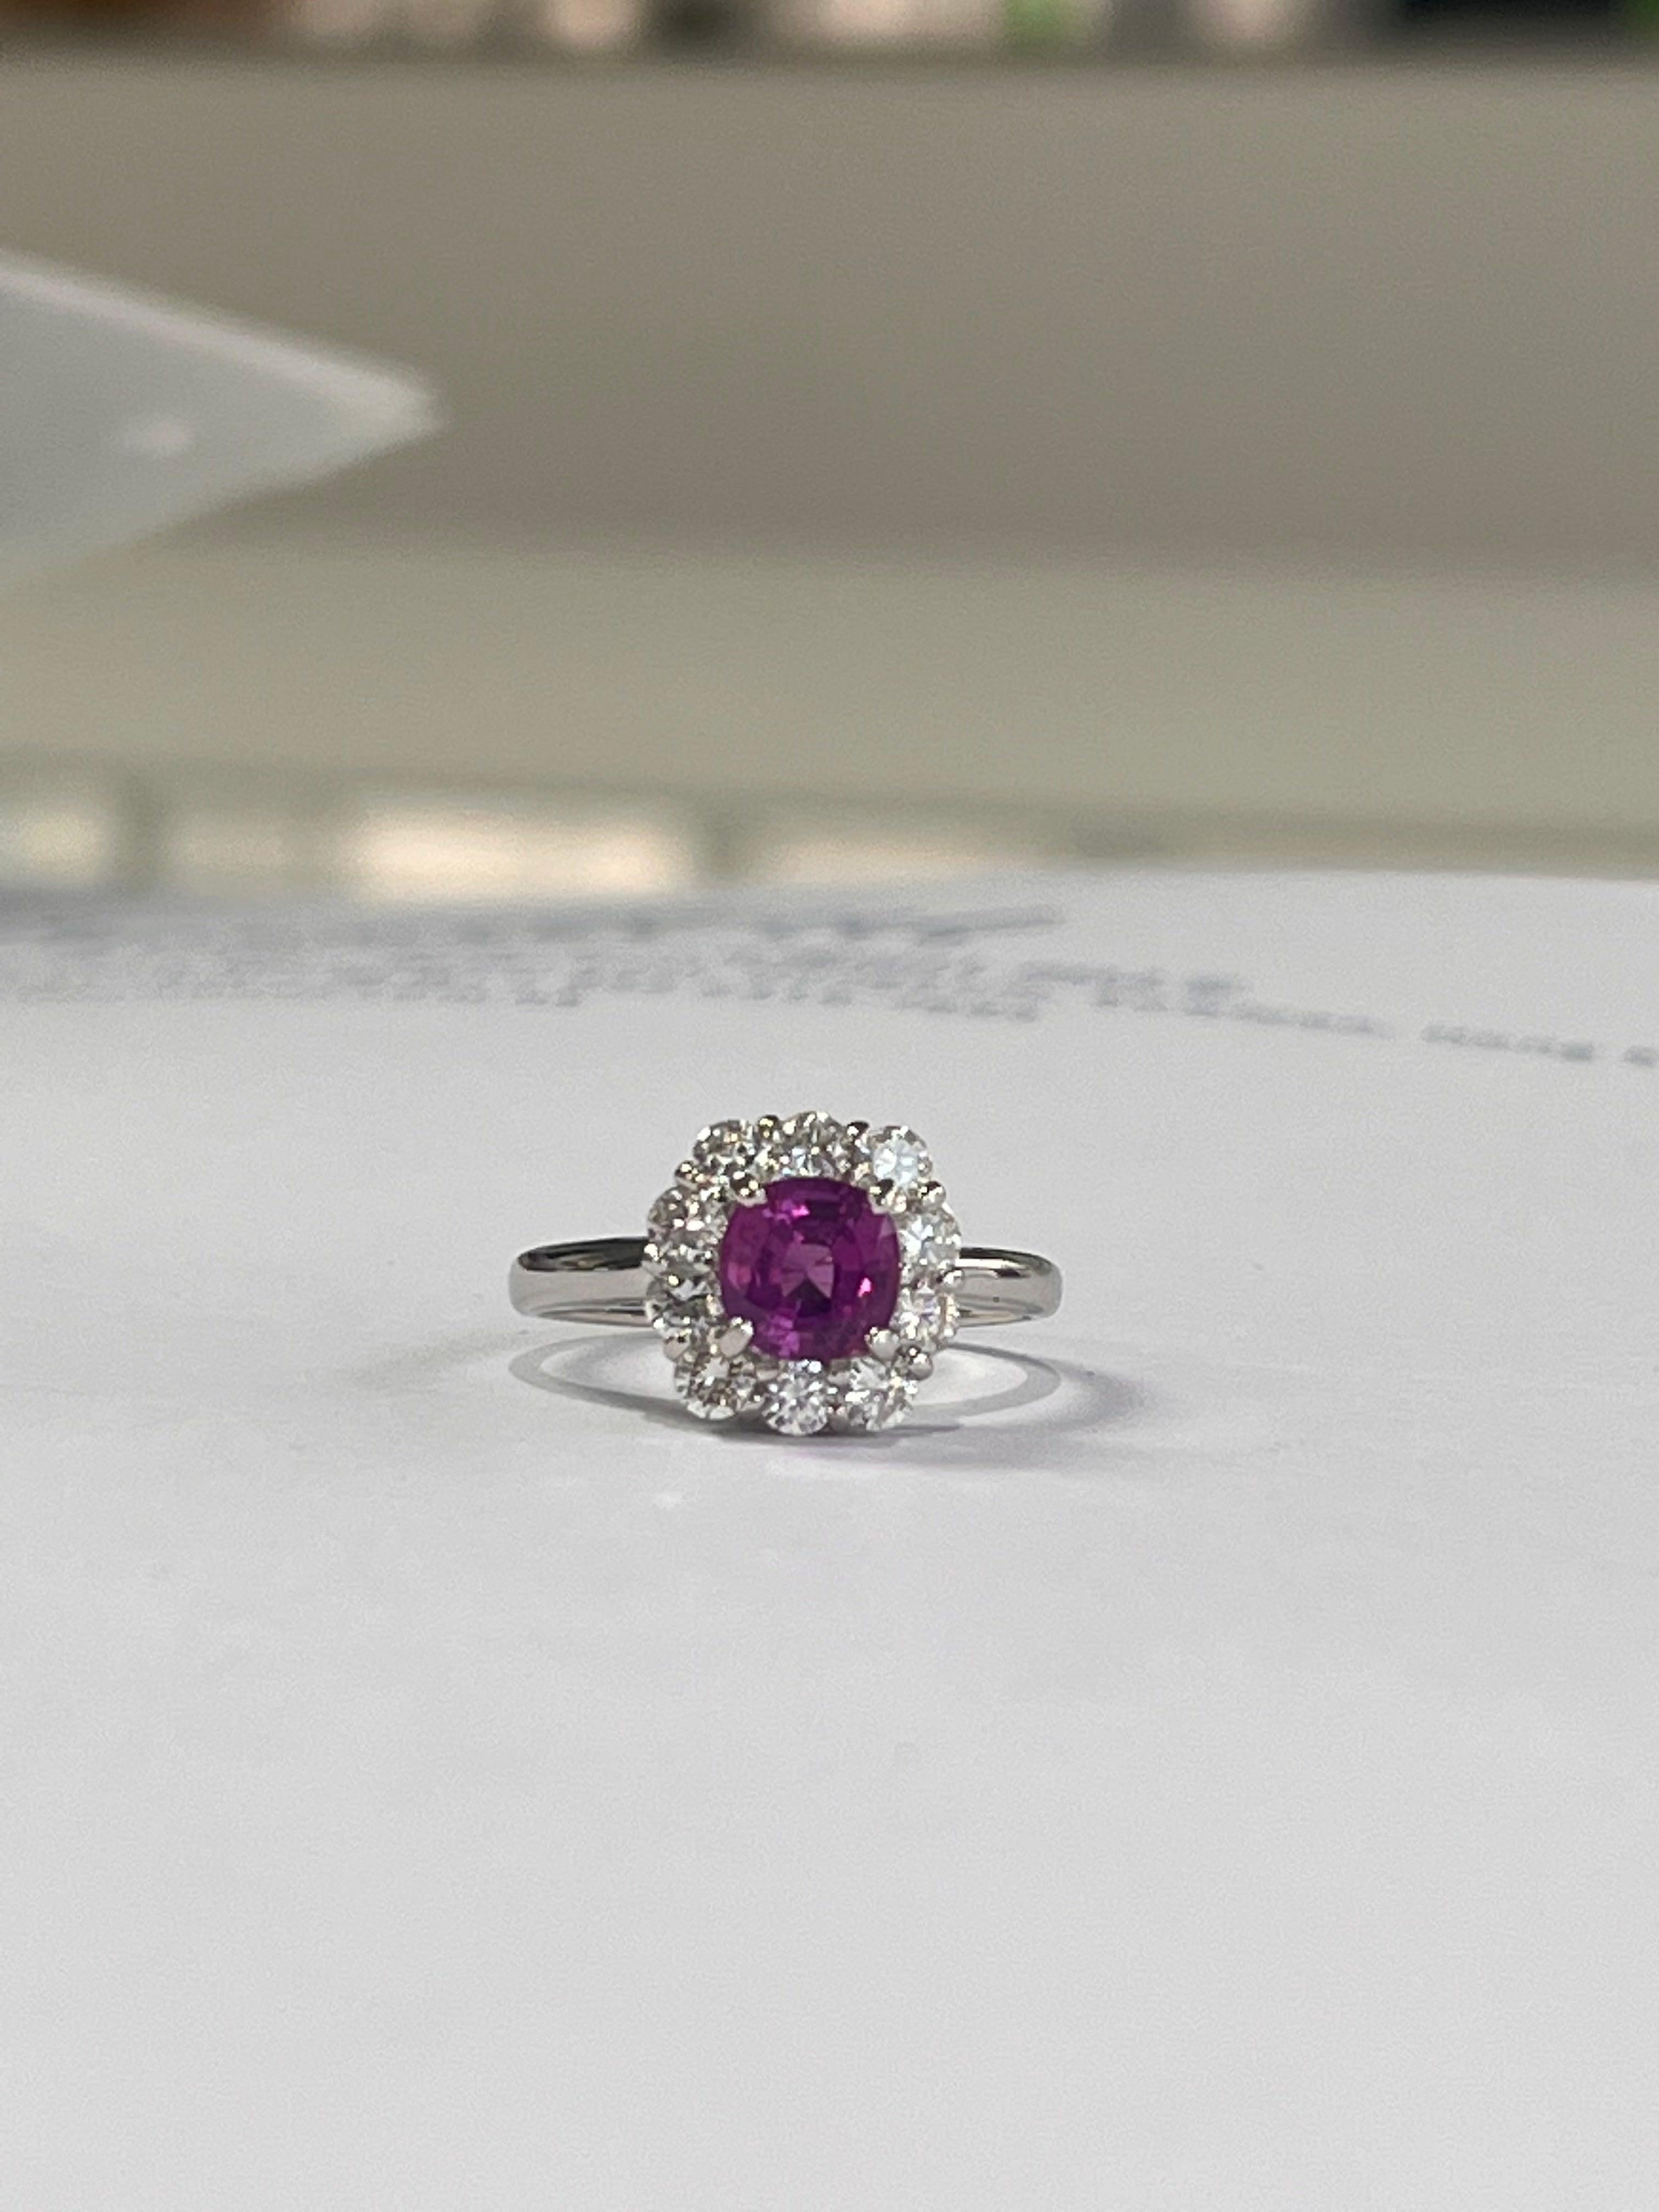 A very beautiful and wearable, natural Pink Sapphire Engagement Ring set in Platinum 900 & Diamonds. The weight of the Pink Sapphire is 1.18 carats. The Pink Sapphire is of Ceylon origin. The weight of the Diamonds is 0.64 carats. Net PT weight is